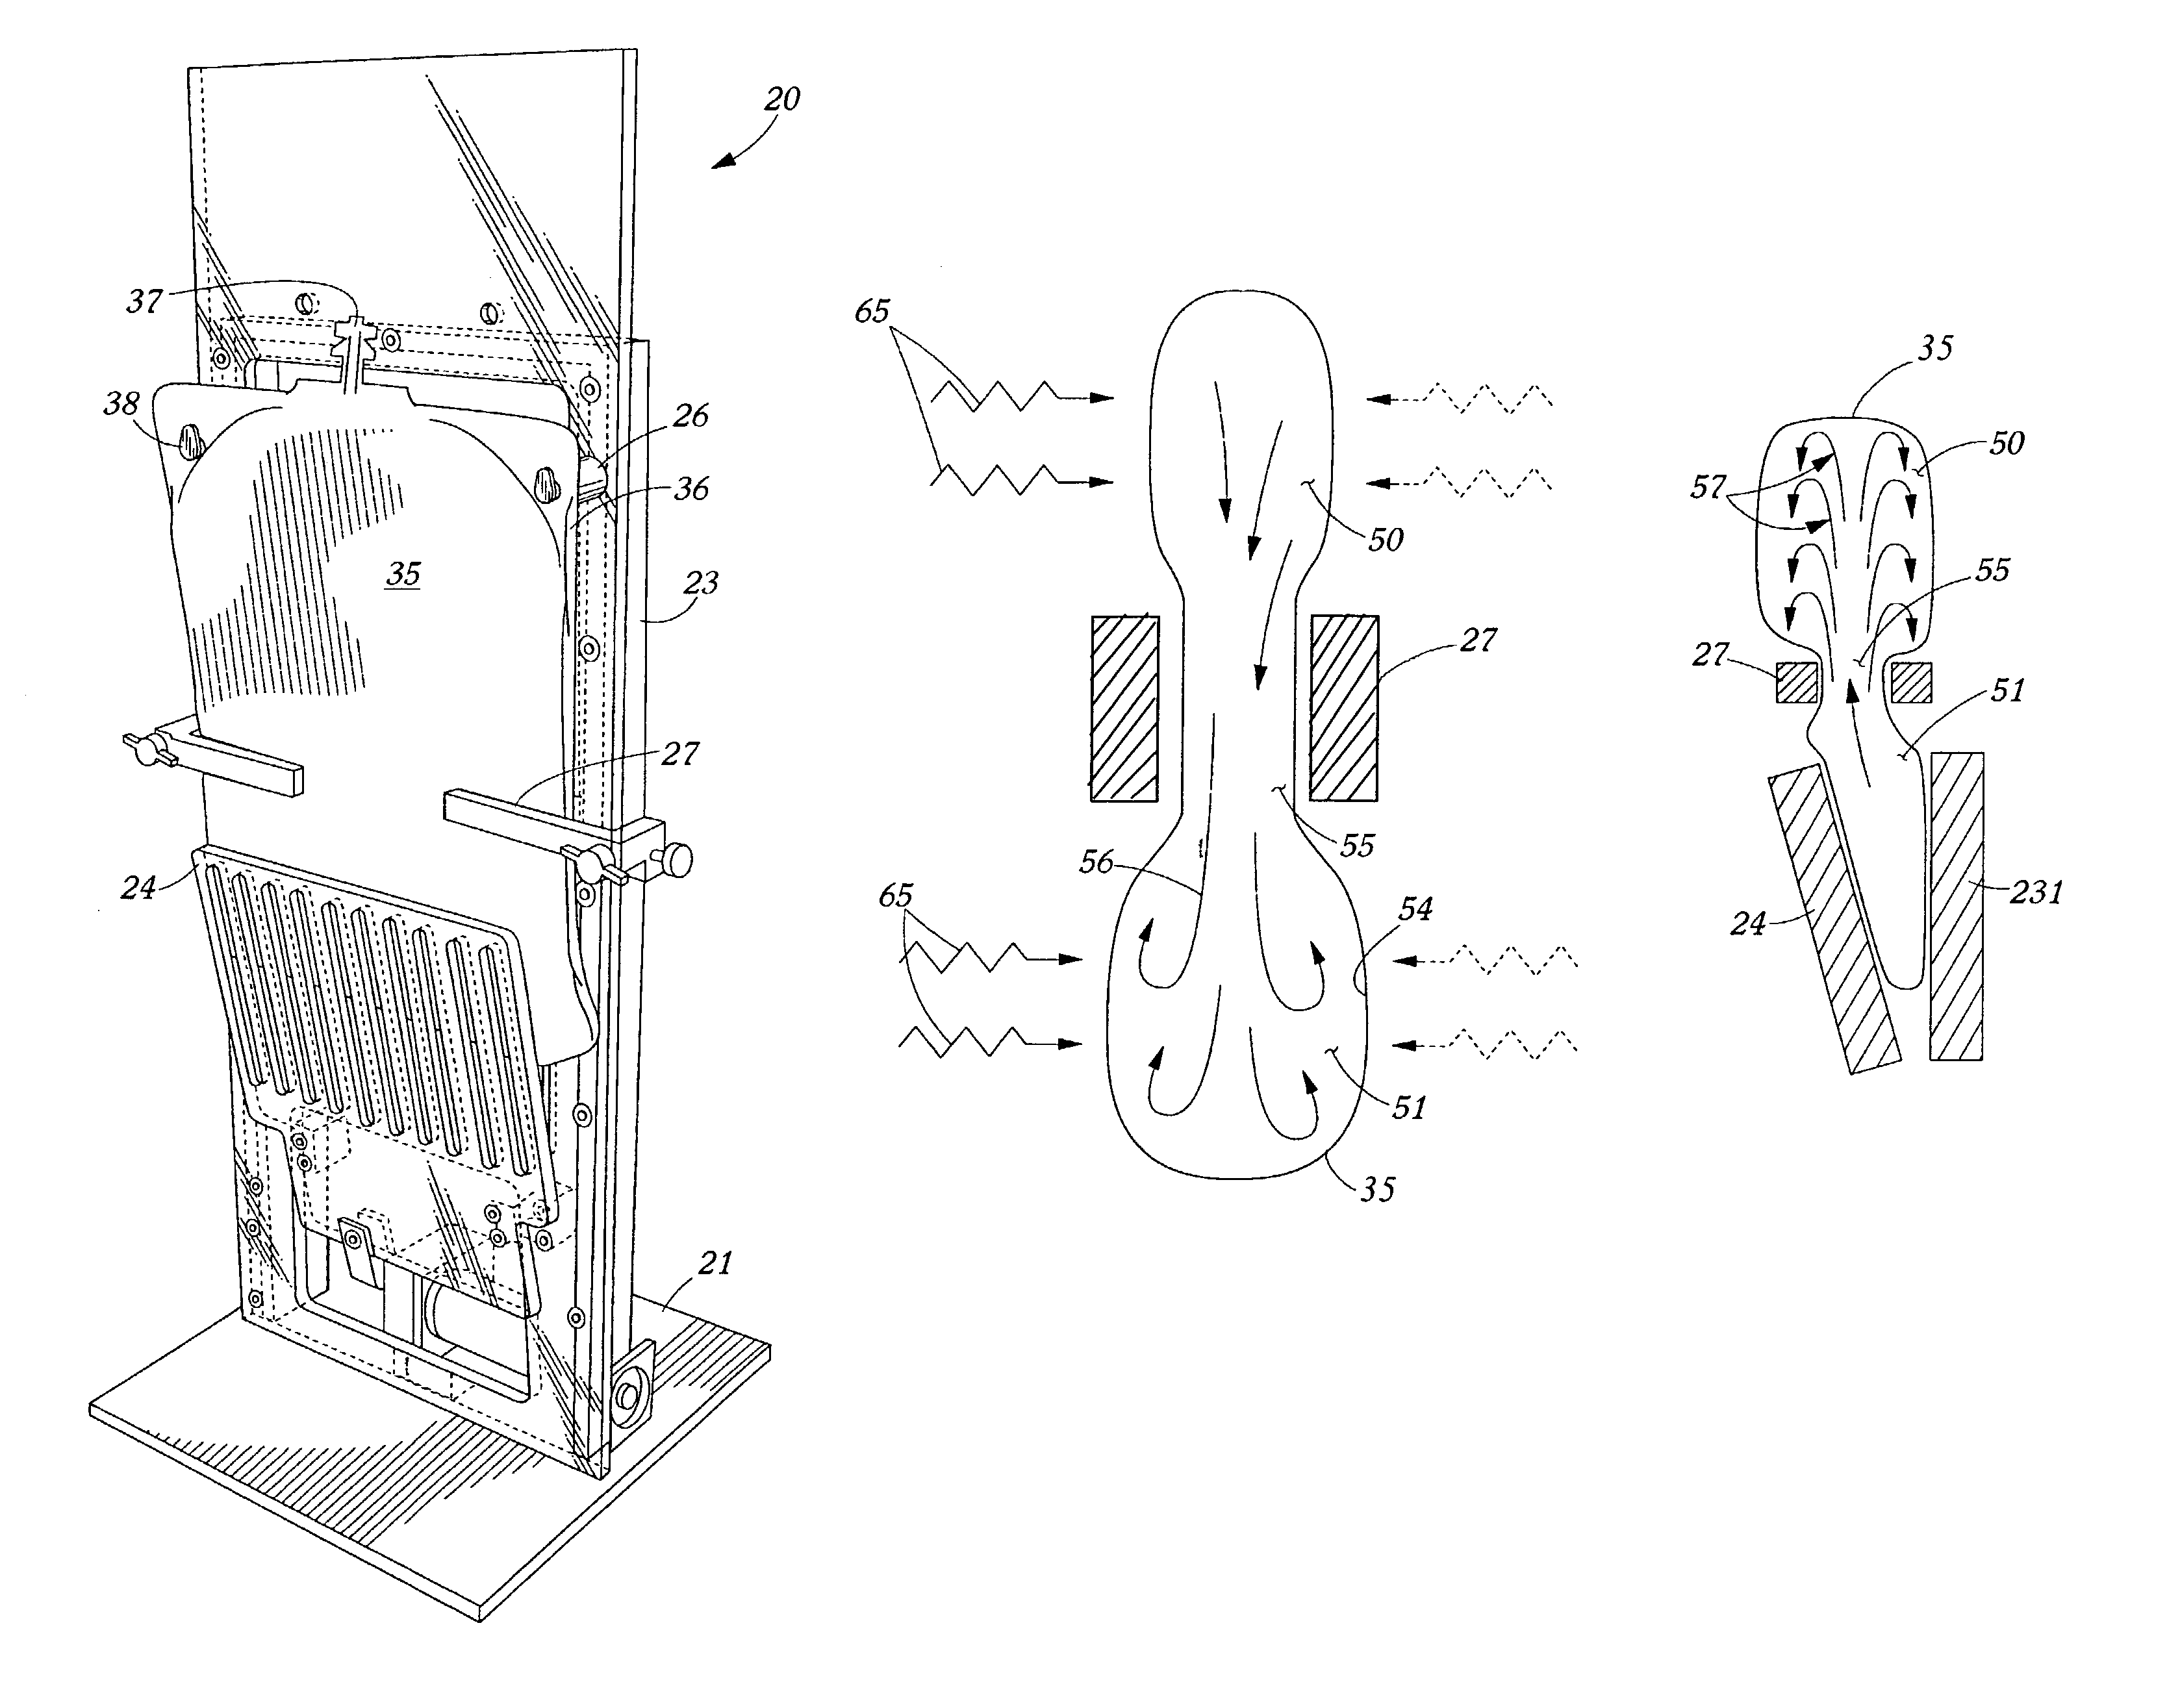 Container or bag mixing apparatuses and/or methods